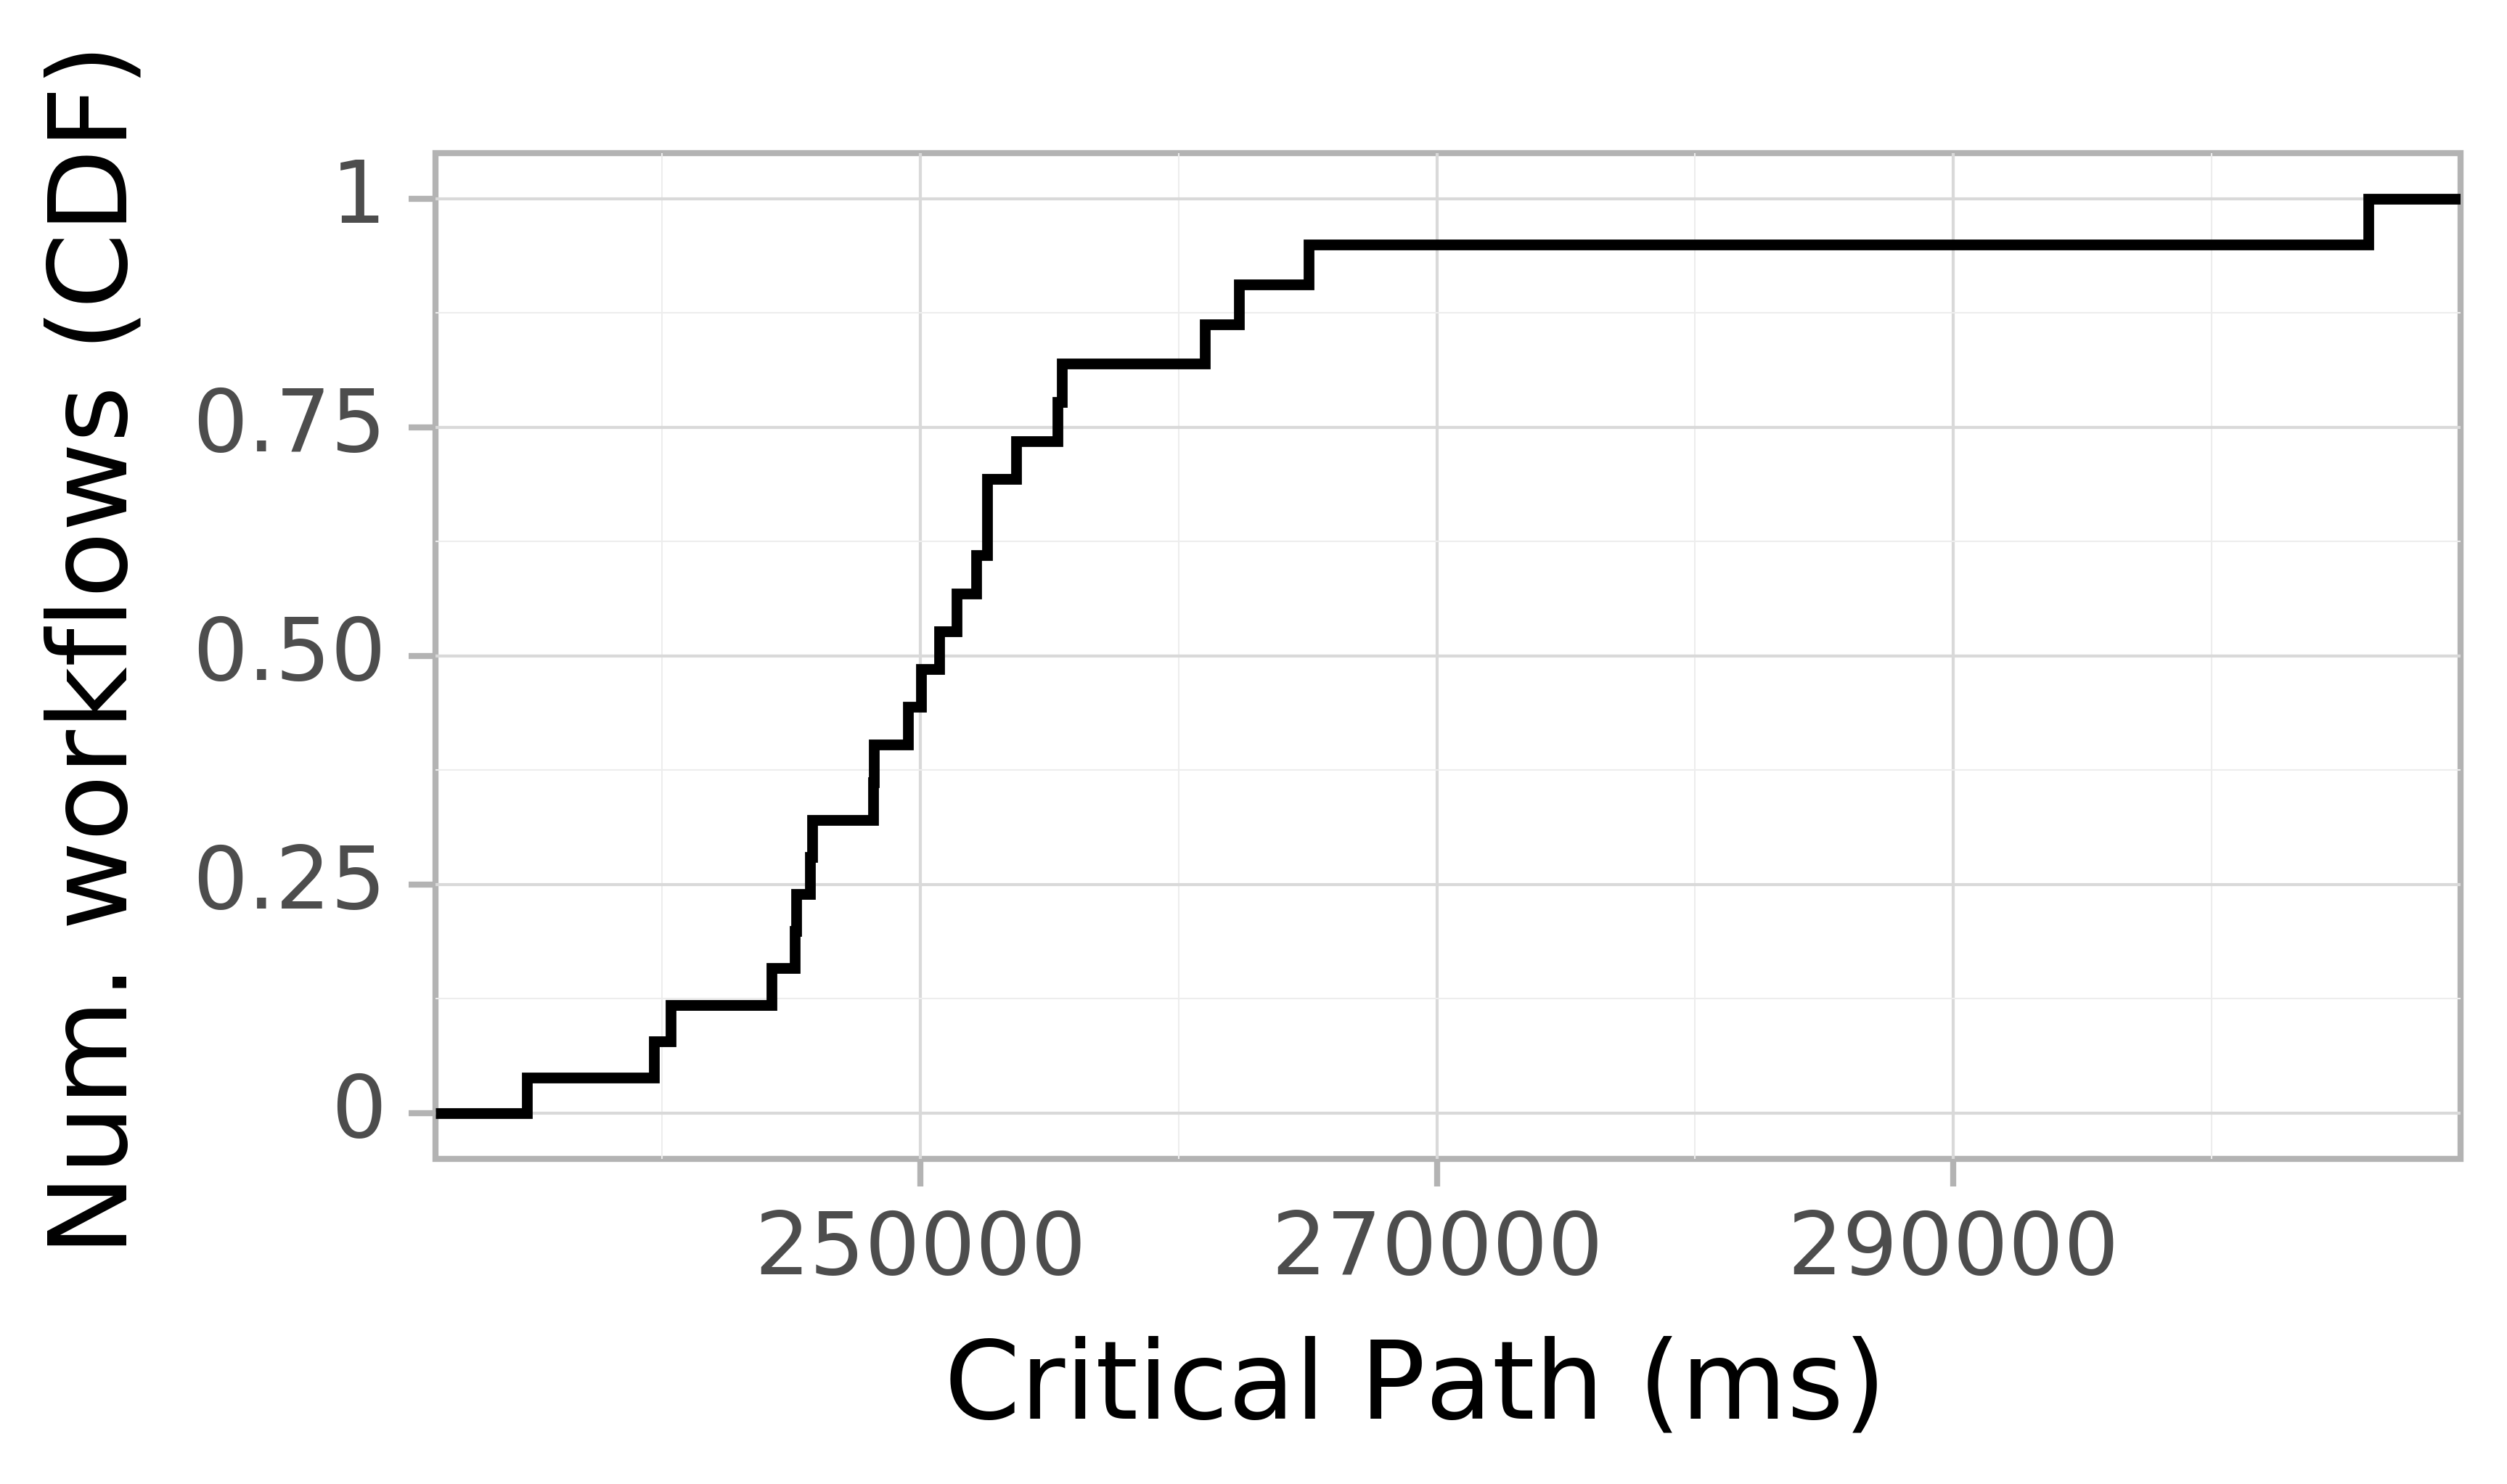 Job runtime CDF graph for the askalon-new_ee31 trace.